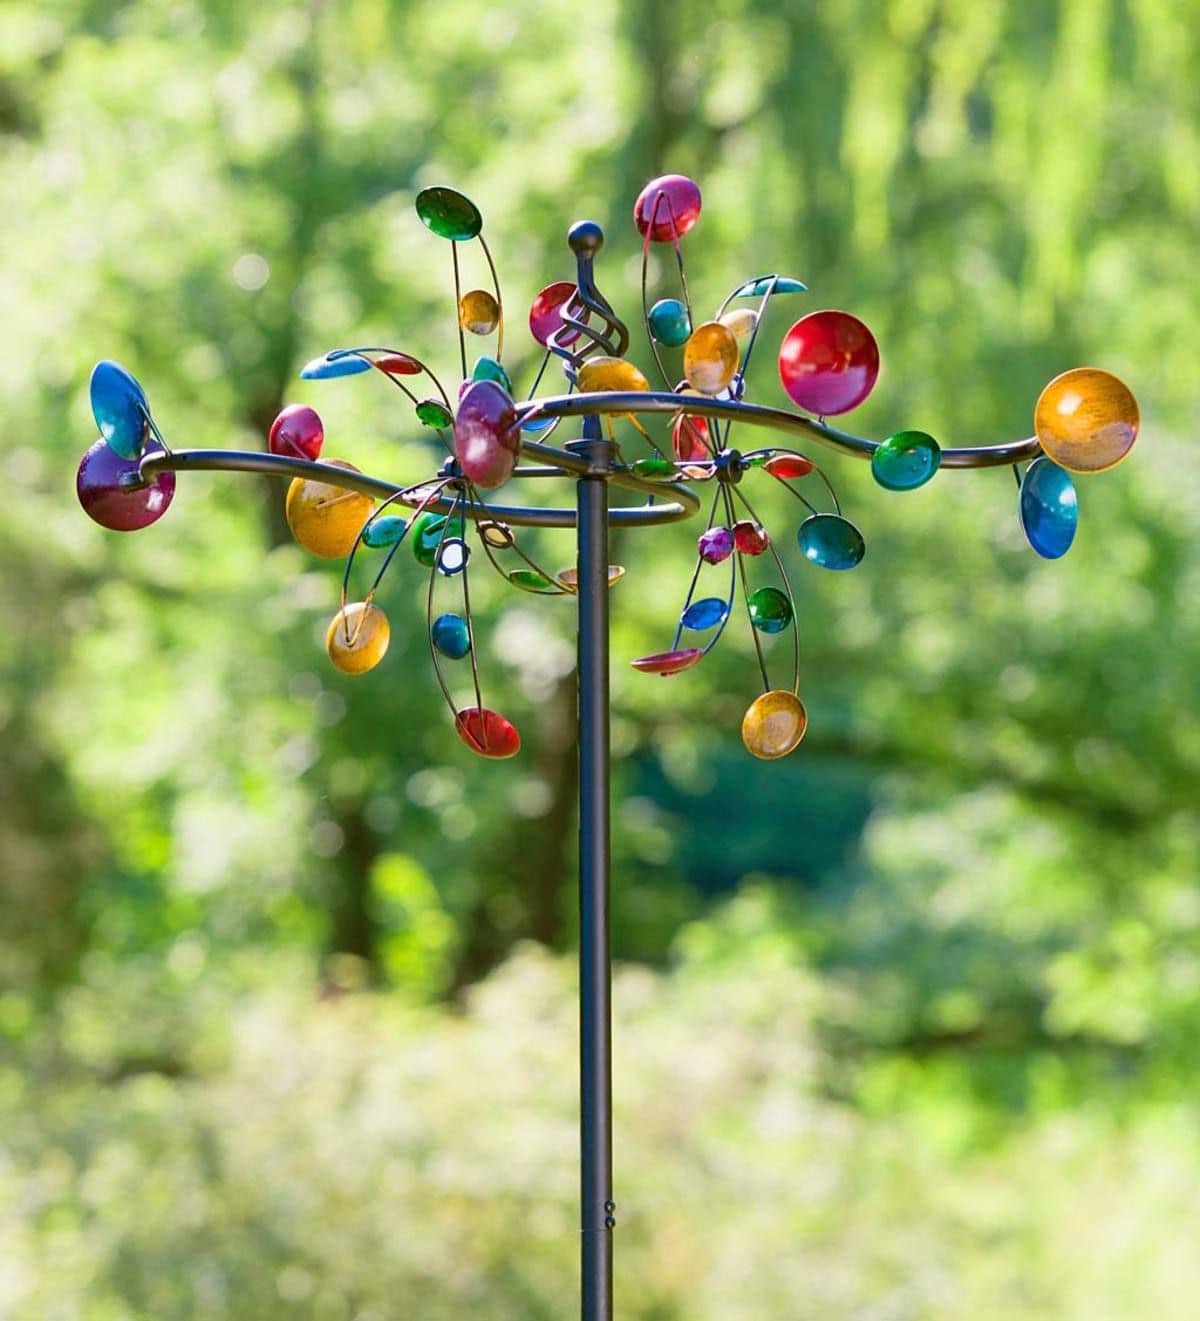 This colorful wind spinner from Plow & Hearth is sure to light up mom's garden area.